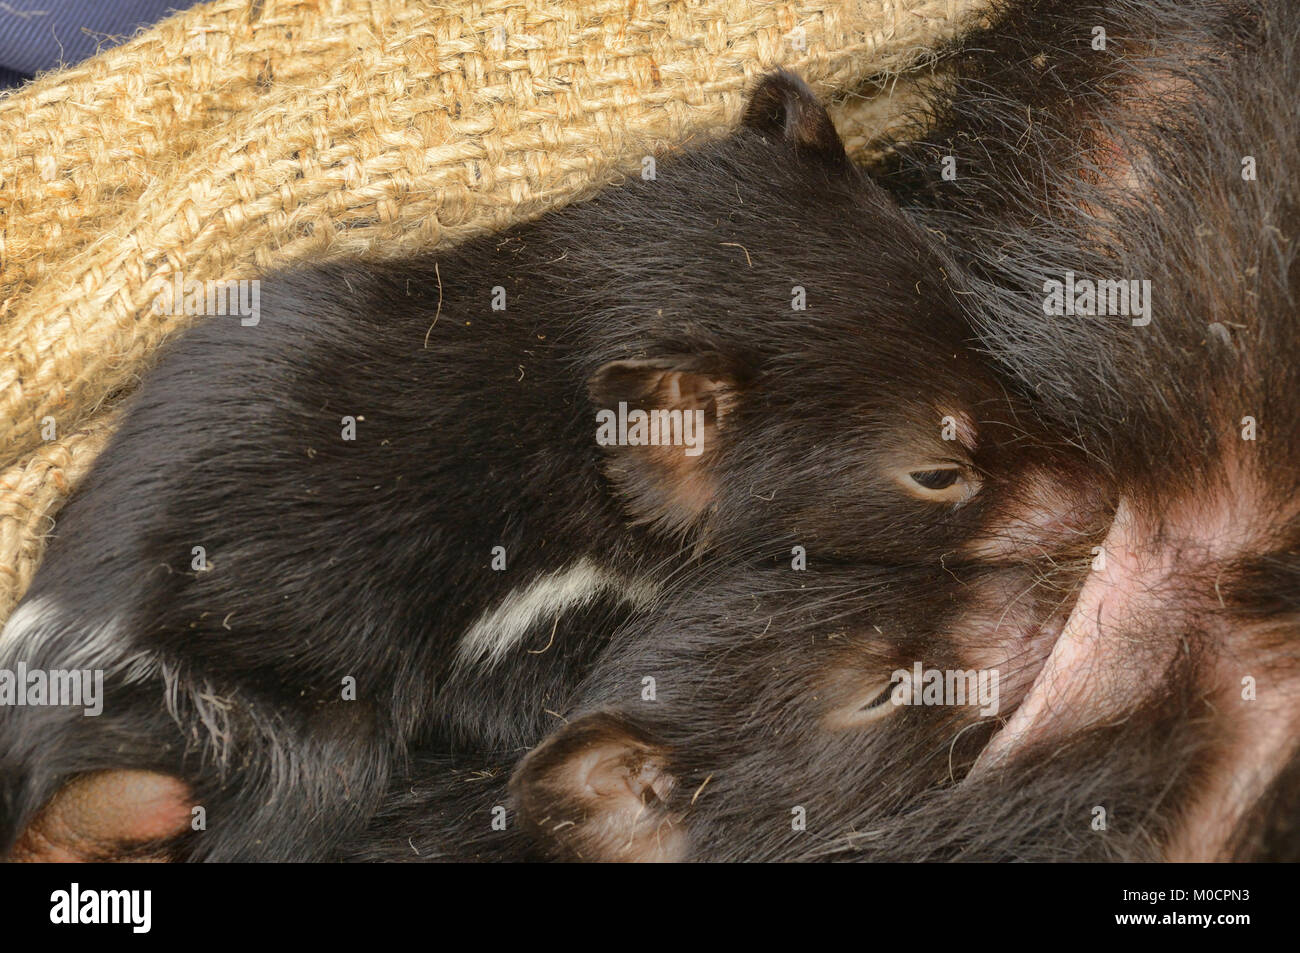 Tasmanian Devil Sarchopilus harrisii Young drinking from pouch DFTD biologist trapping research Threatened species  Photographed in Tasmania, Australi Stock Photo